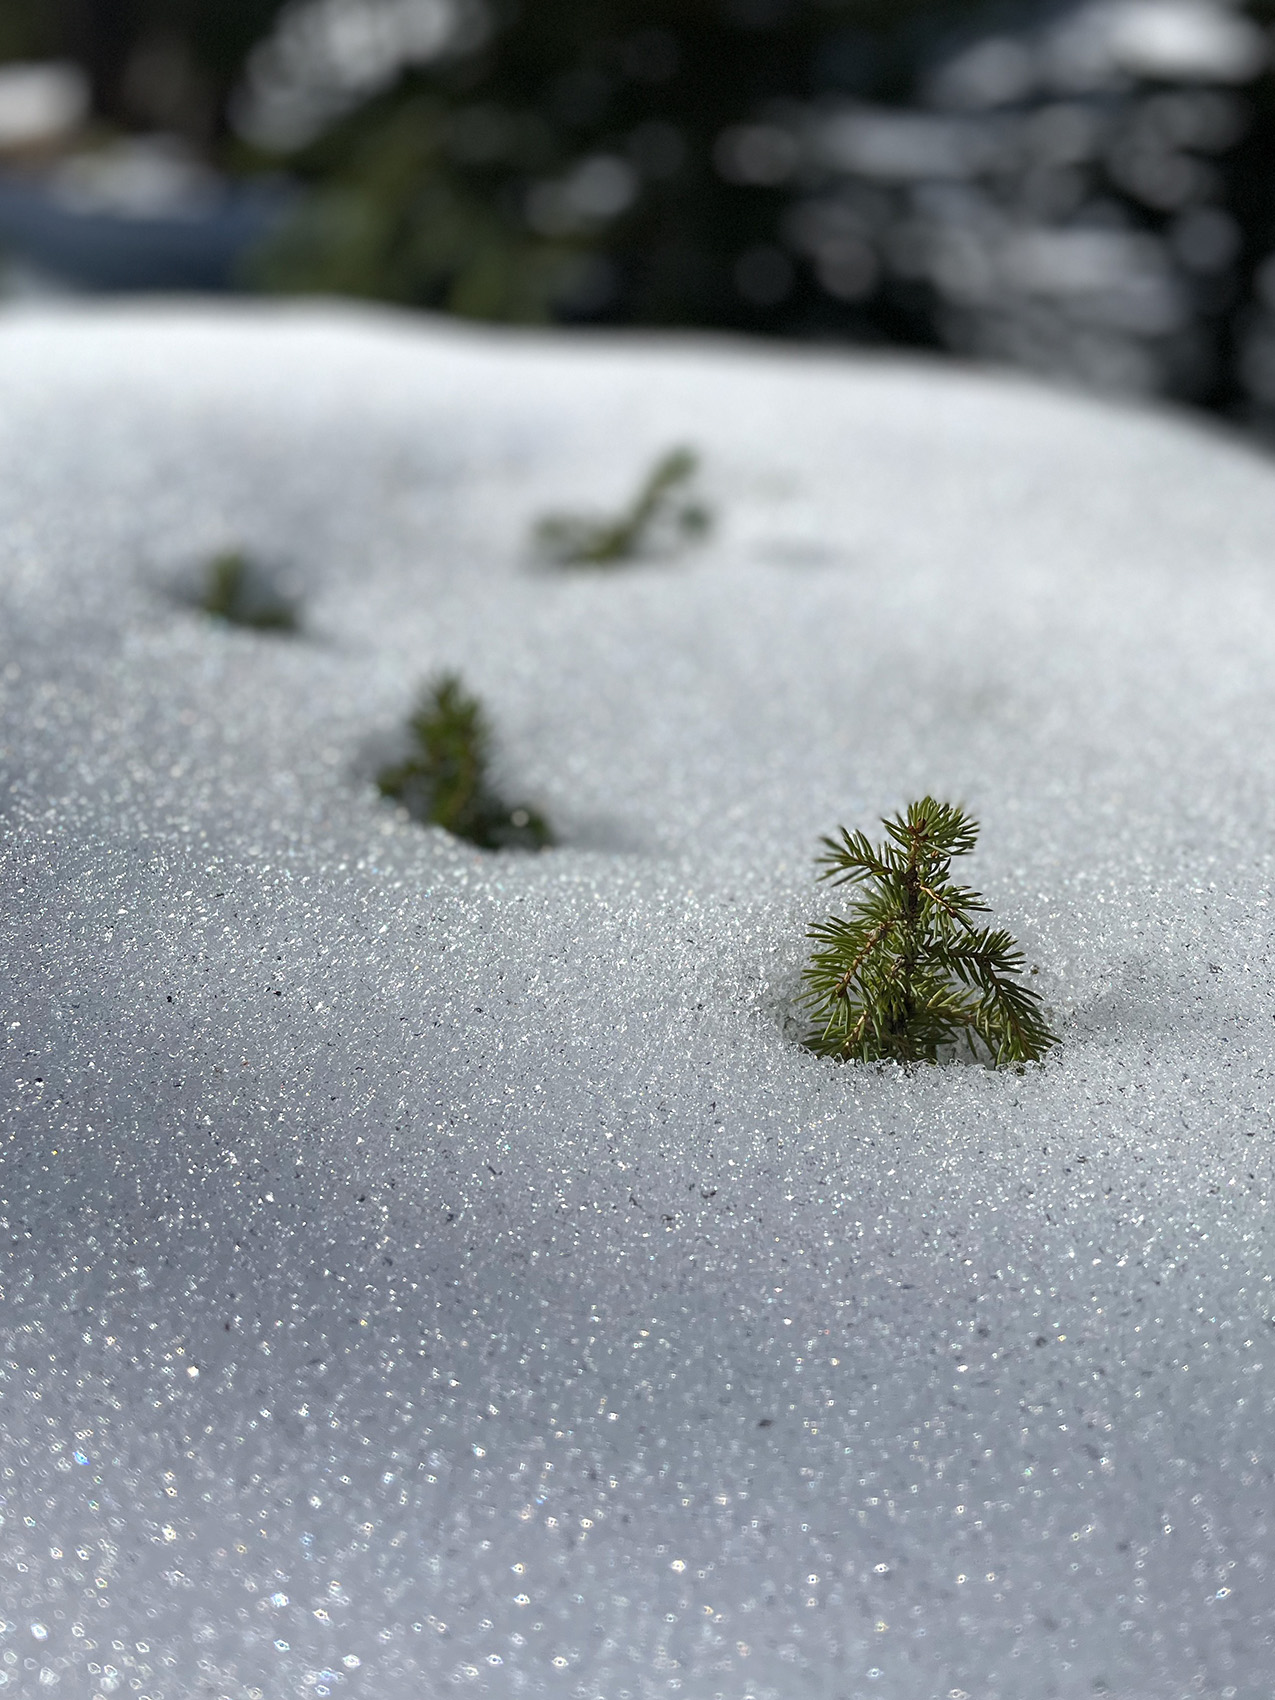 closeup photo with shallow depth of field showing the very tips of evergreen trees sticking out of deep snow